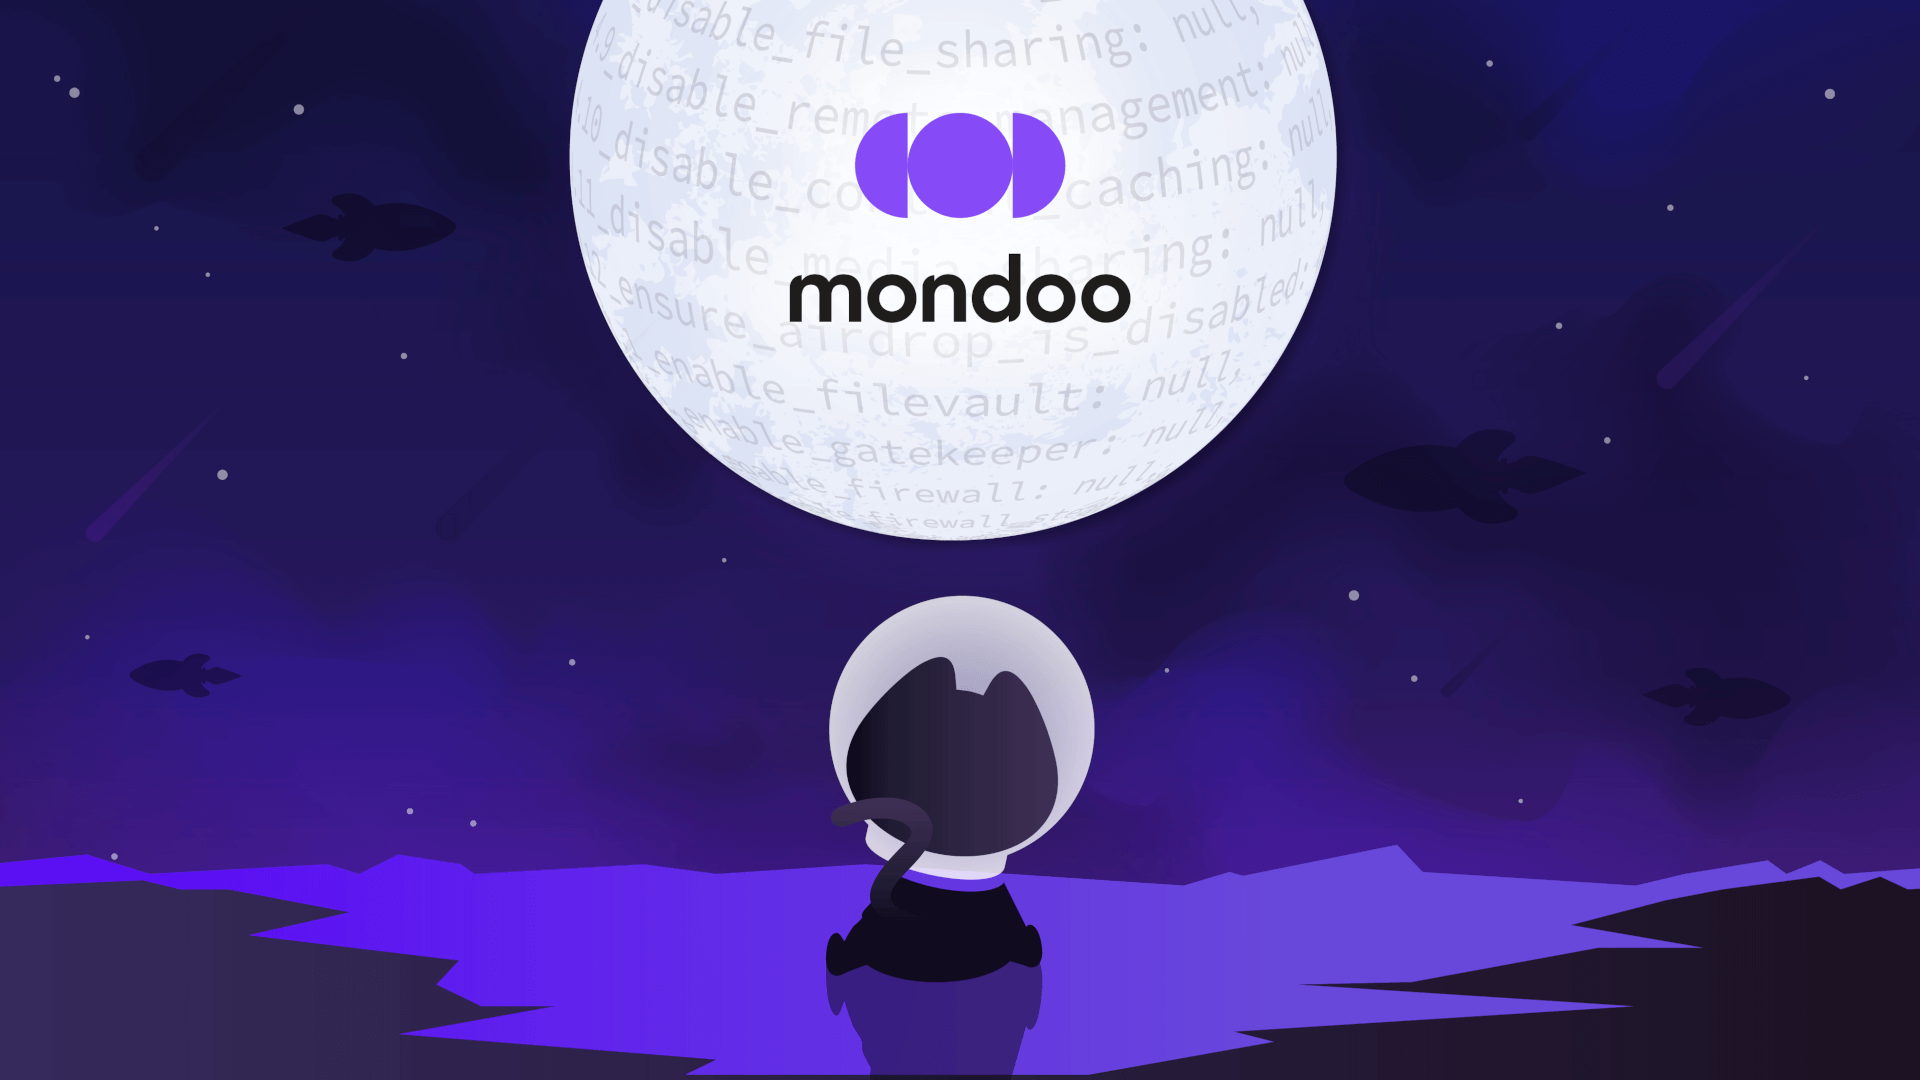 An illustration showing a space kitty dreaming of exploring new worlds with Mondoo